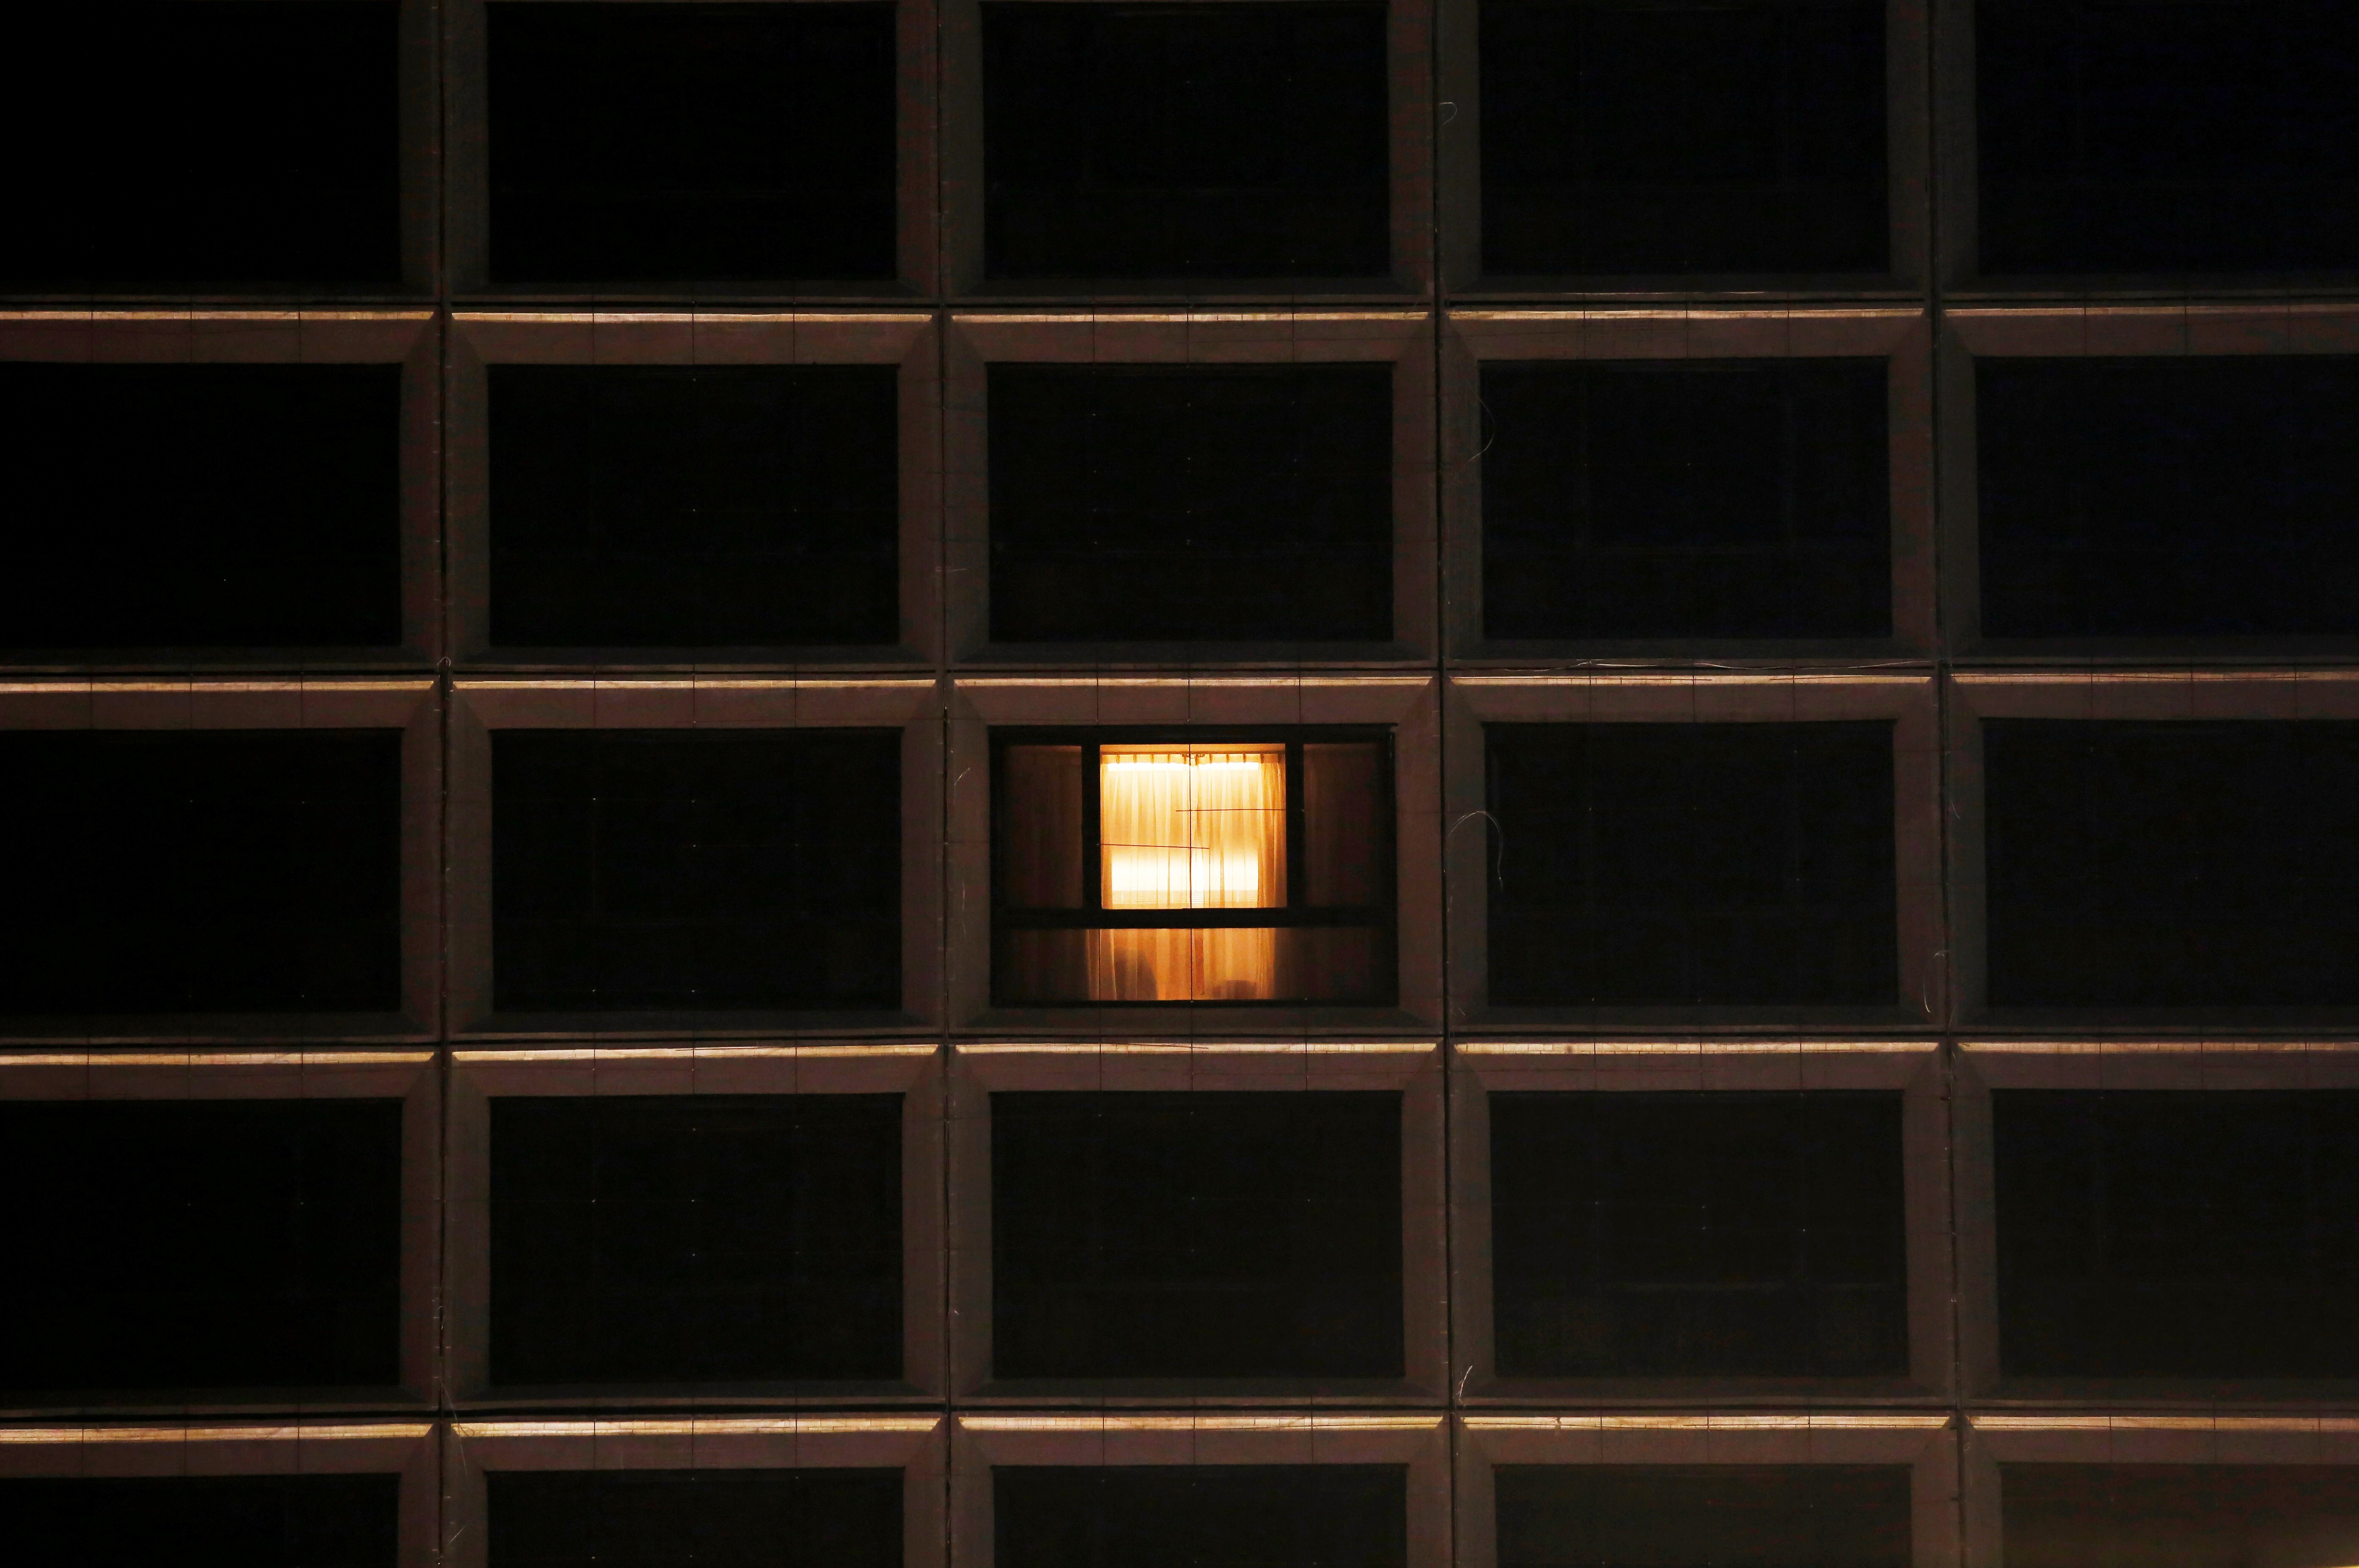 A lit window at a hotel in Hong Kong, amid the coronavirus pandemic. The tourism and hospitality industry is in a desperate situation and companies’ survival is at stake. Photo: Reuters